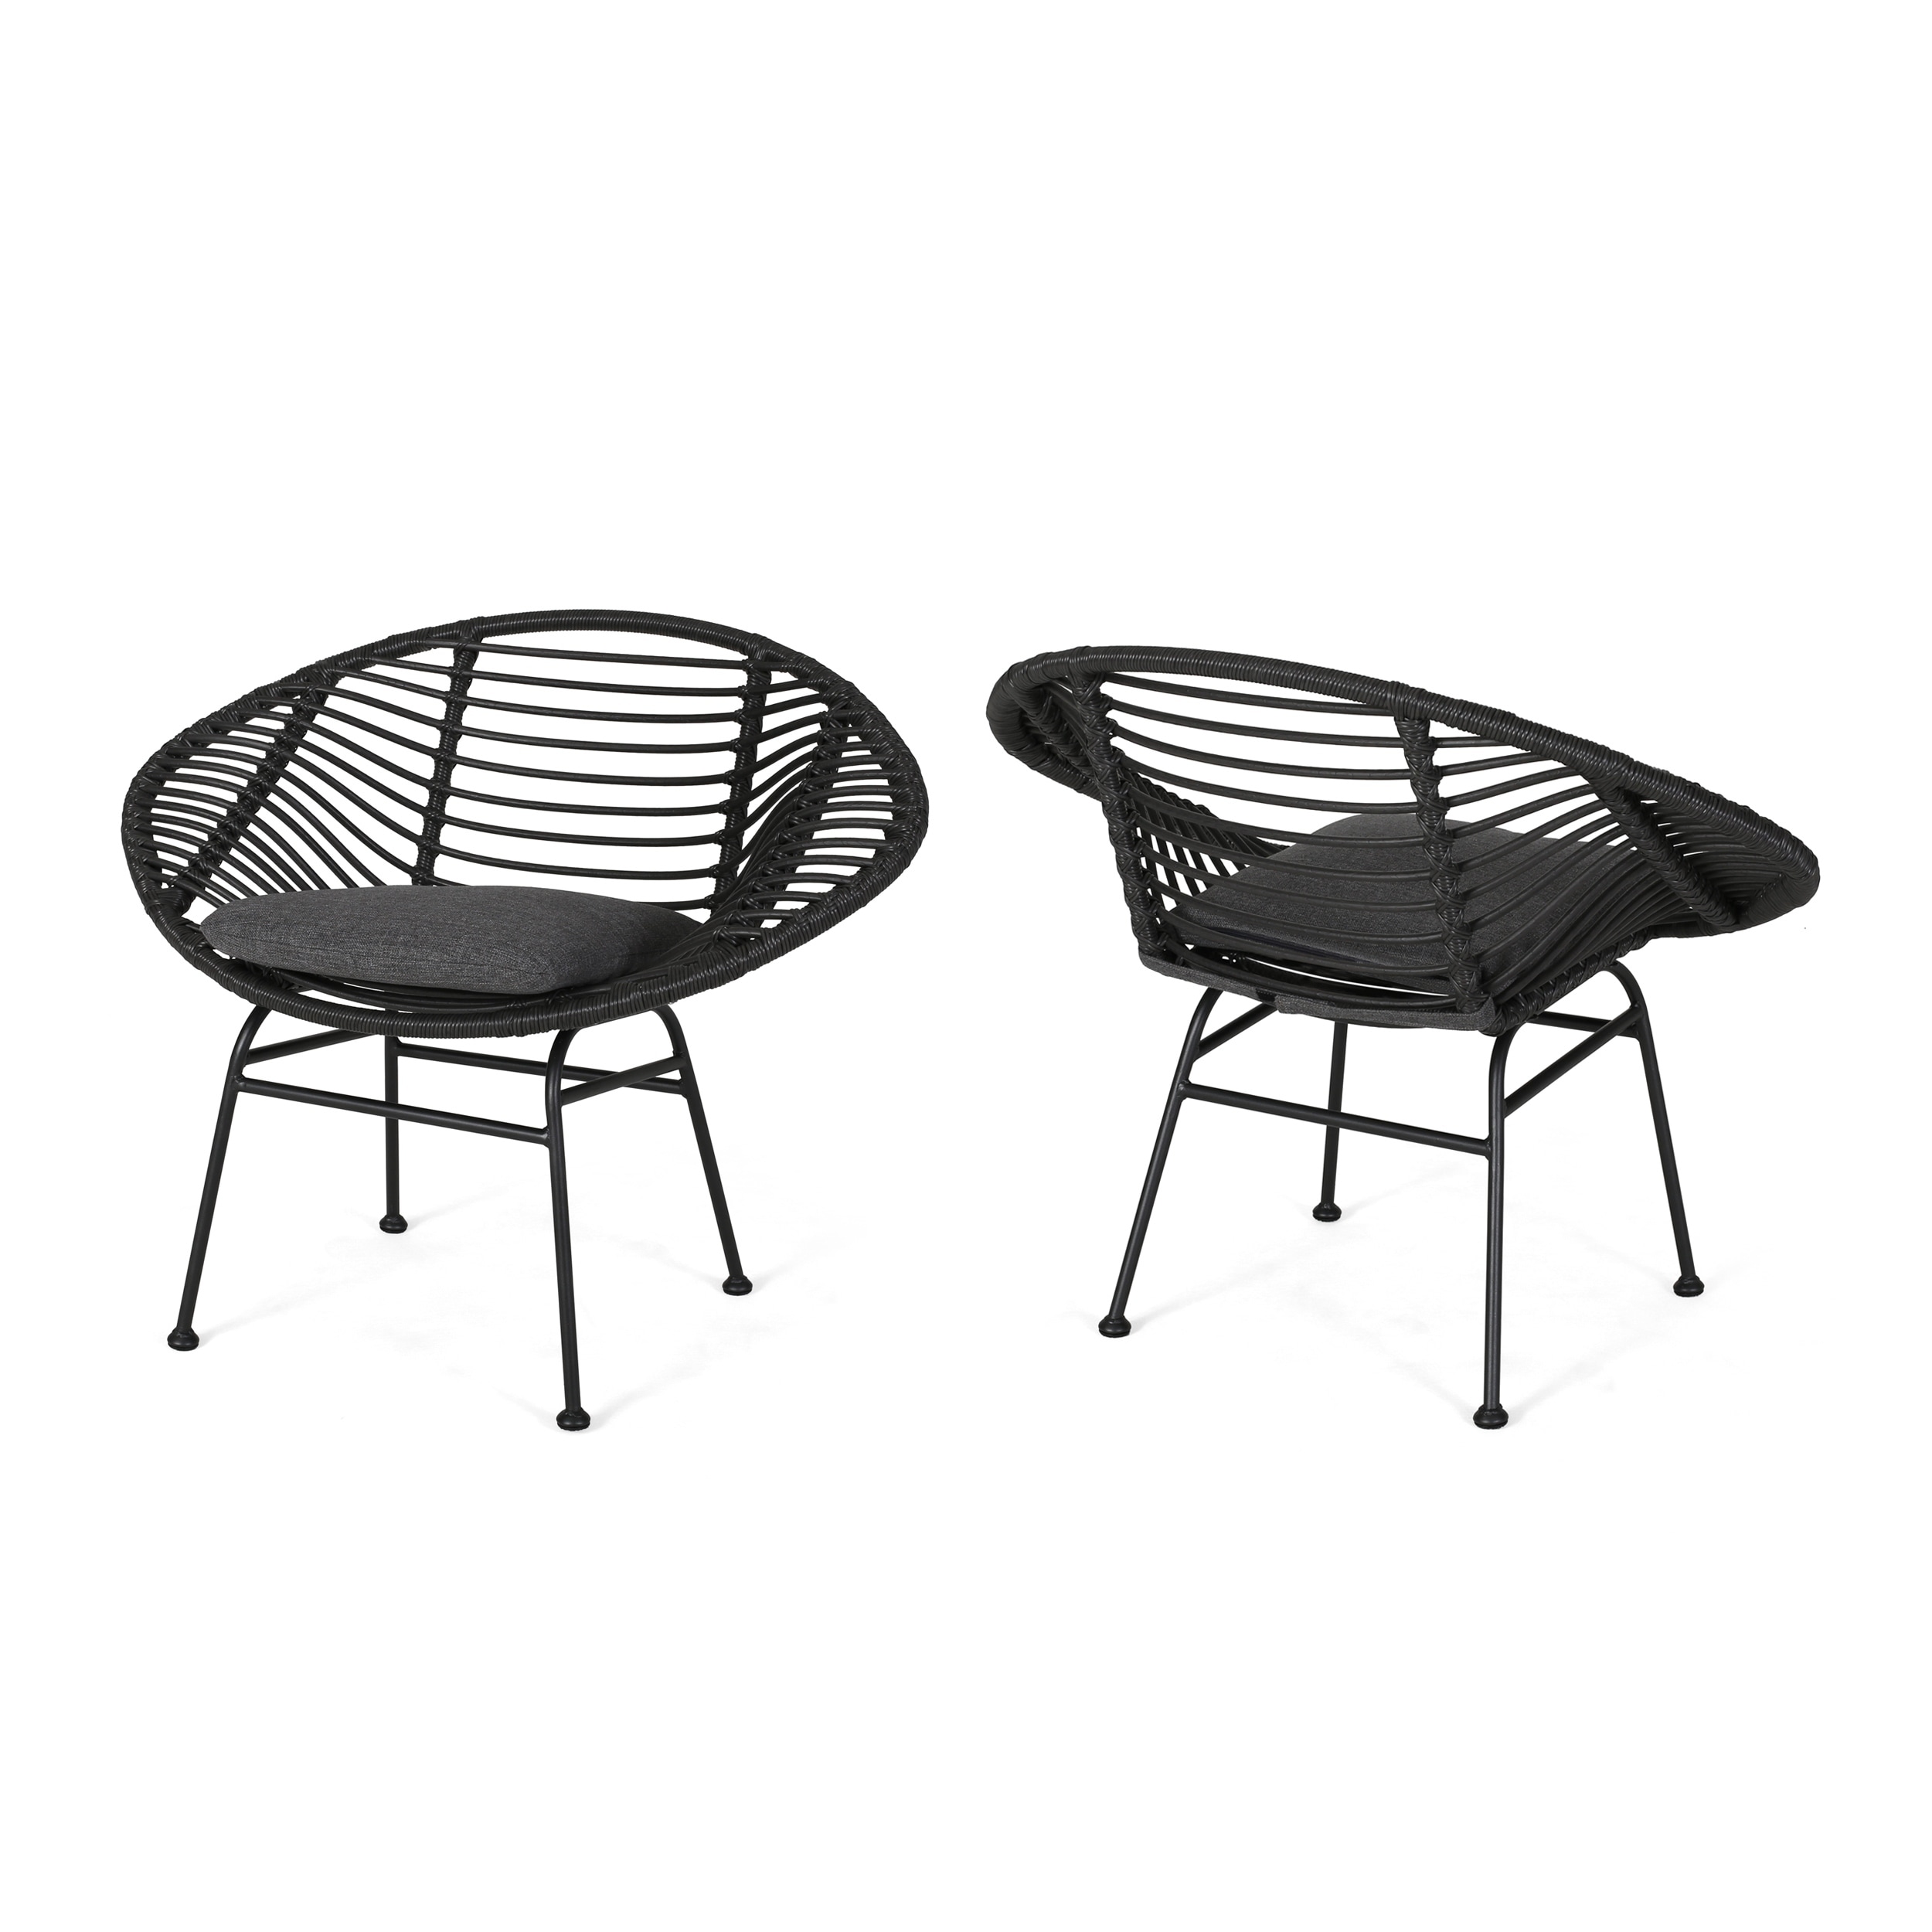 San Antonio Outdoor Woven Faux Rattan Chairs with Cushions (Set of 2) by Christopher Knight Home